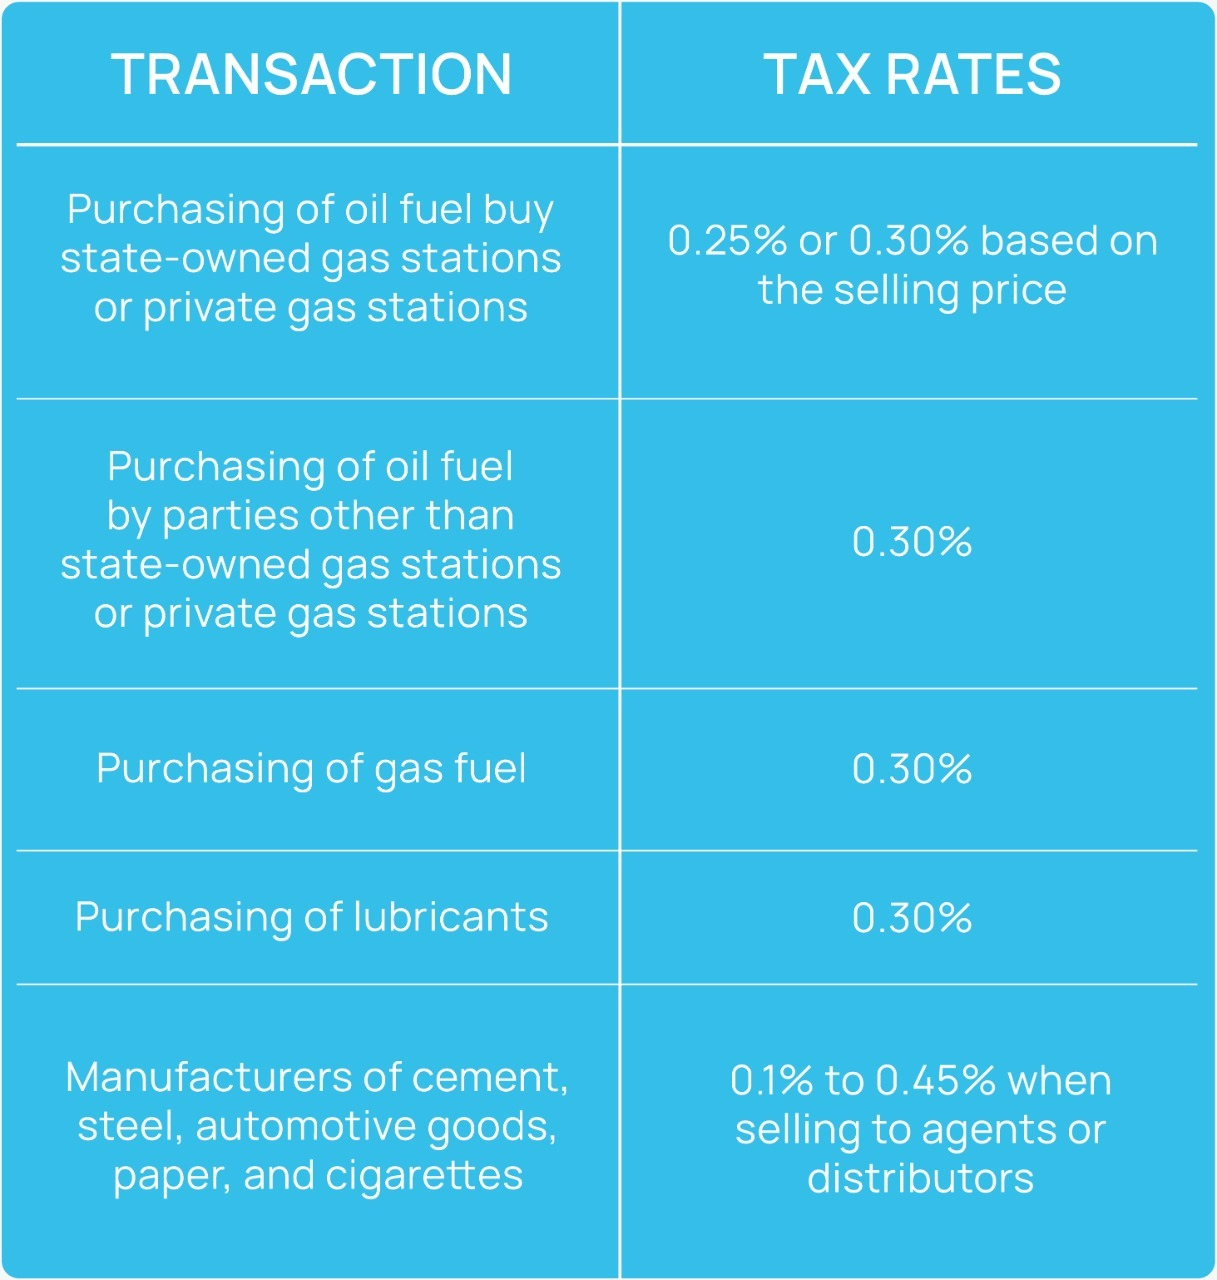 The withholding tax rate Table